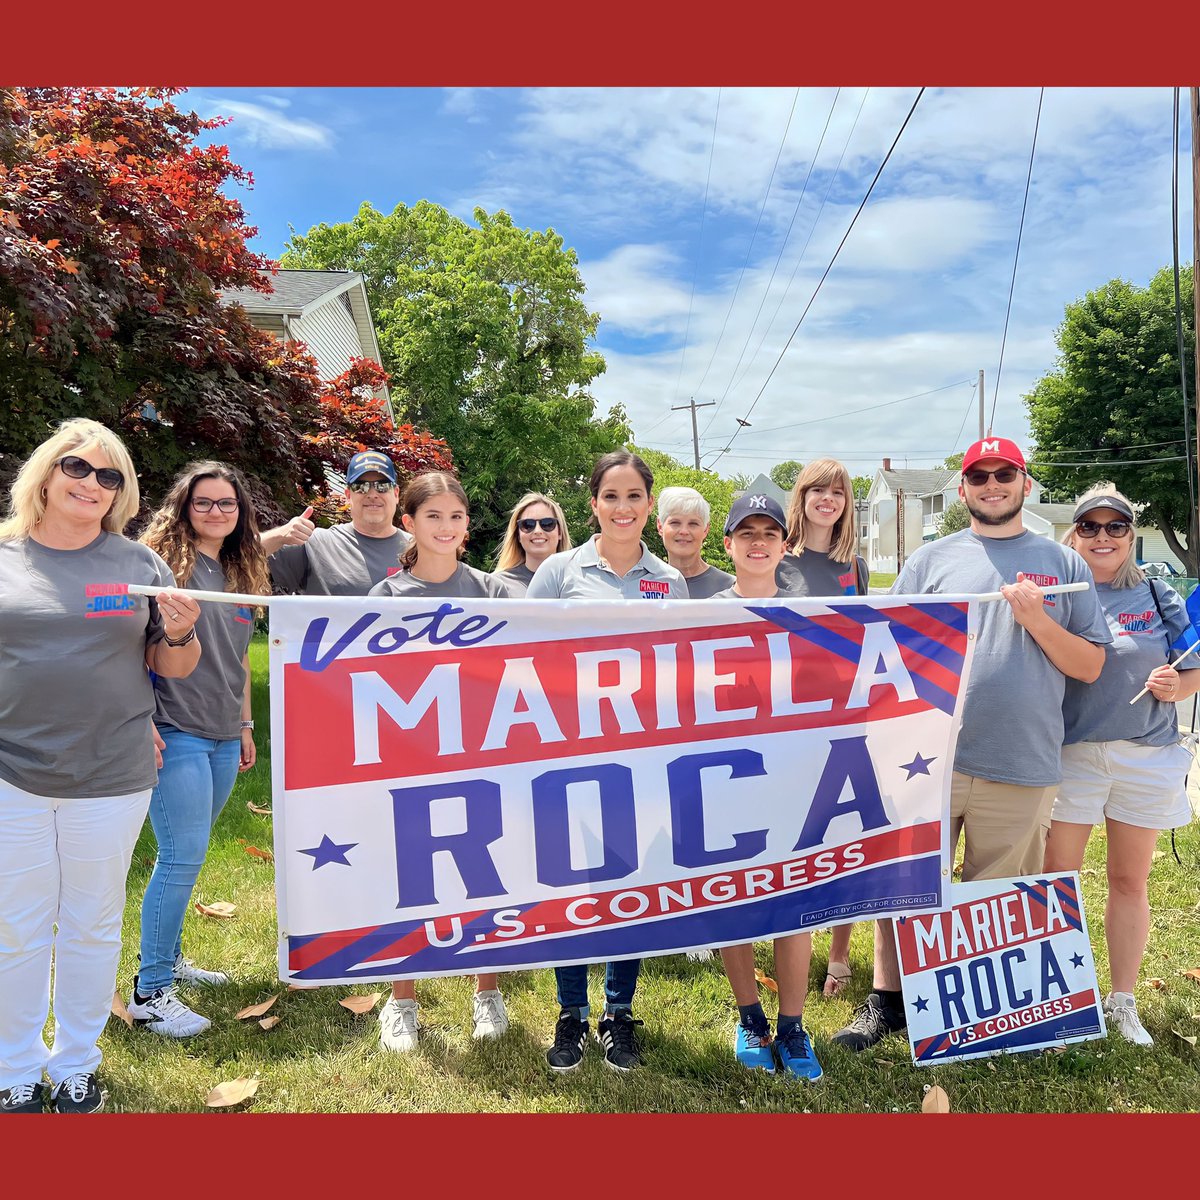 First parade of the cycle down in the books! Thank you to all that came out in support and walked with us in Woodsboro. Enjoyed meeting everyone in the parade route. 

Happy Memorial Day Weekend! 🇺🇸🇺🇸

#rocaforcongress #MD06